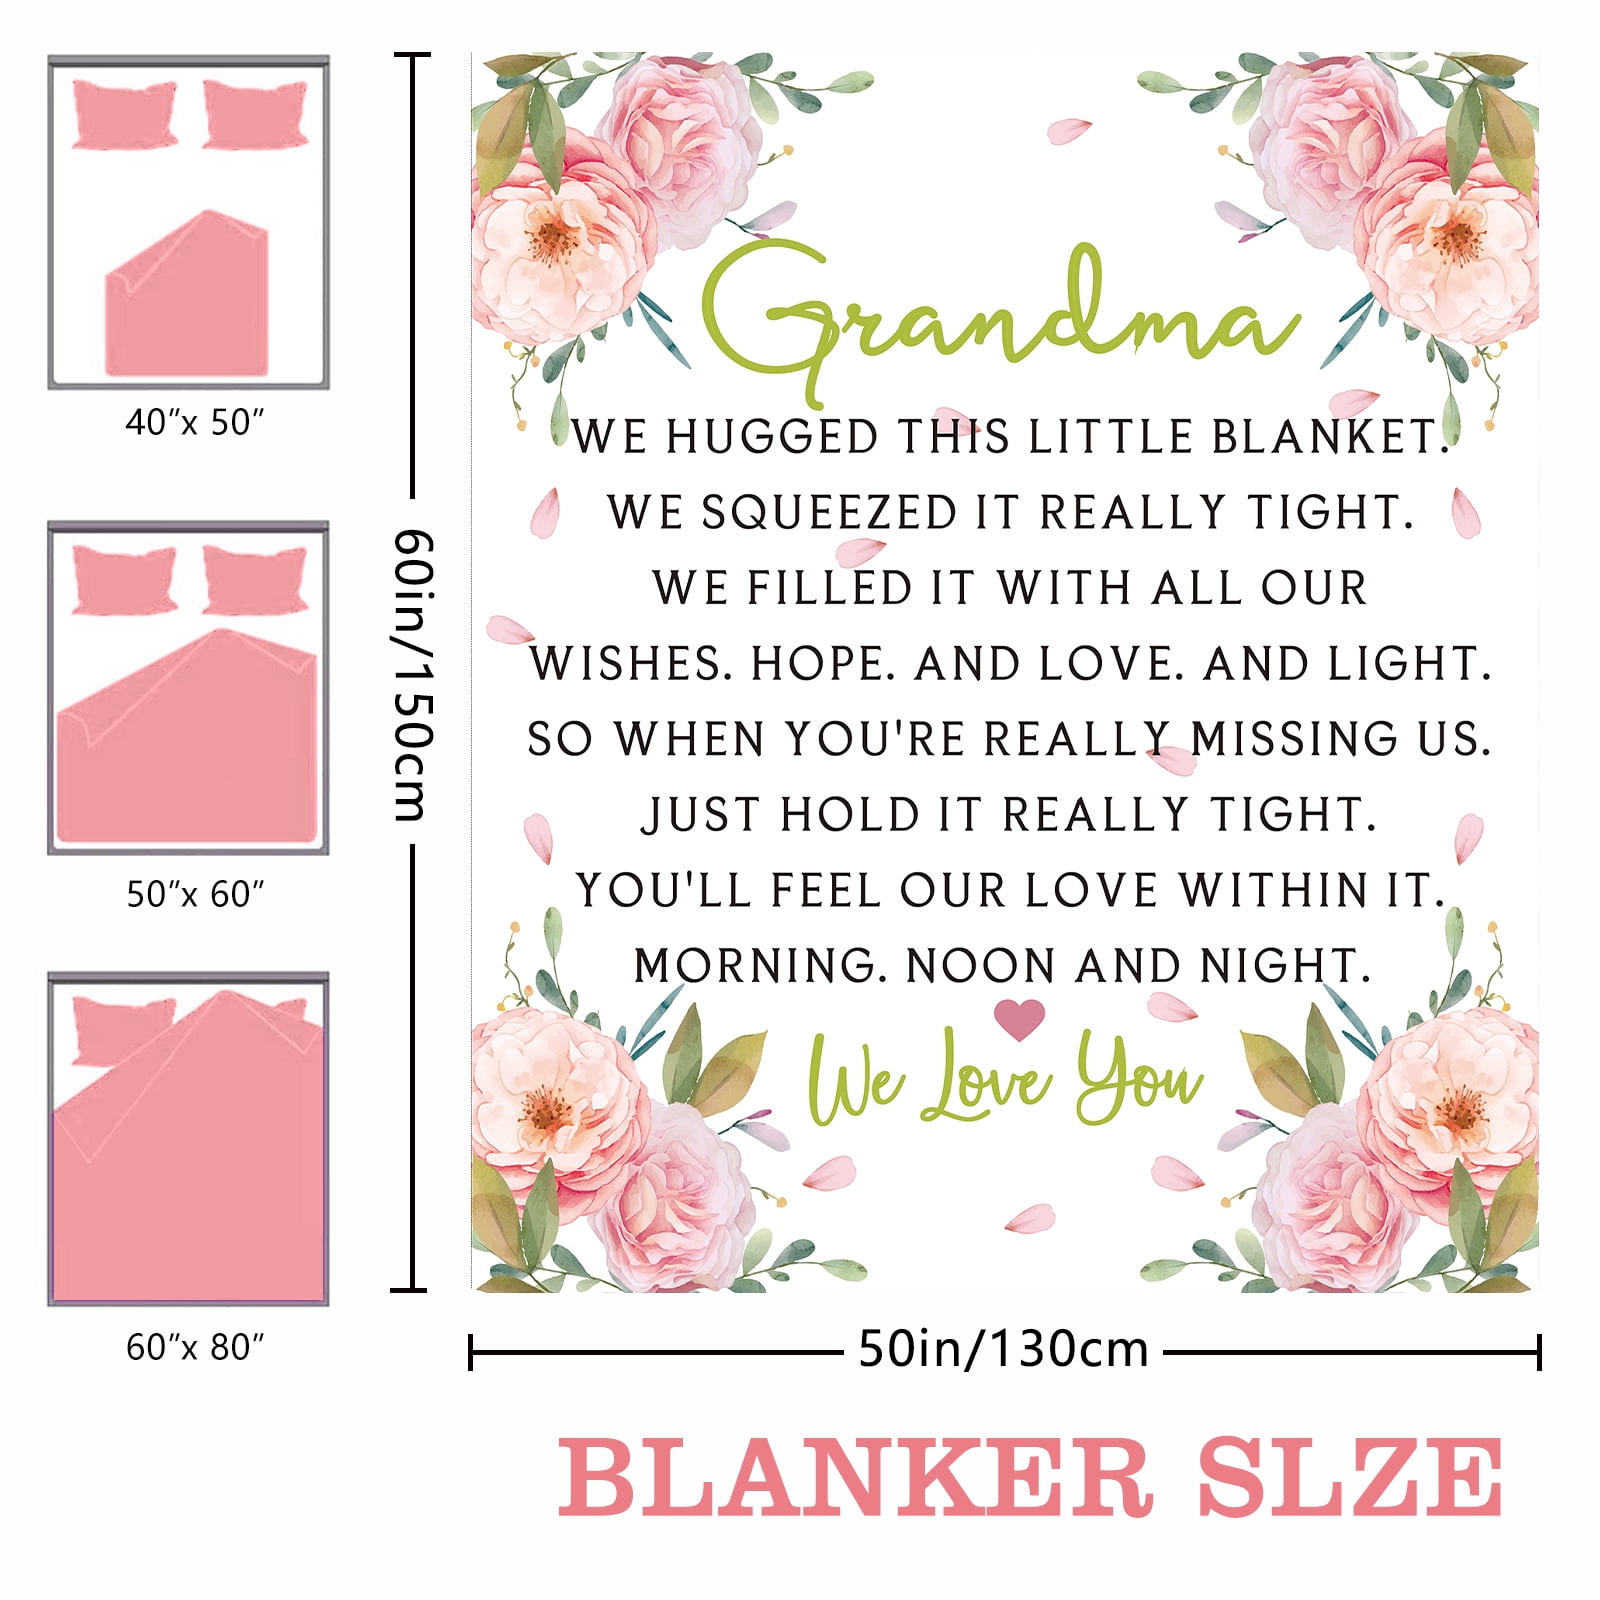 Xutapy Grandma Gifts Blanket 60''x50'', Best Gifts for Grandma, Great  Grandma Birthday Gifts, Grandma Gifts from Grandchildren, Gigi Gifts for